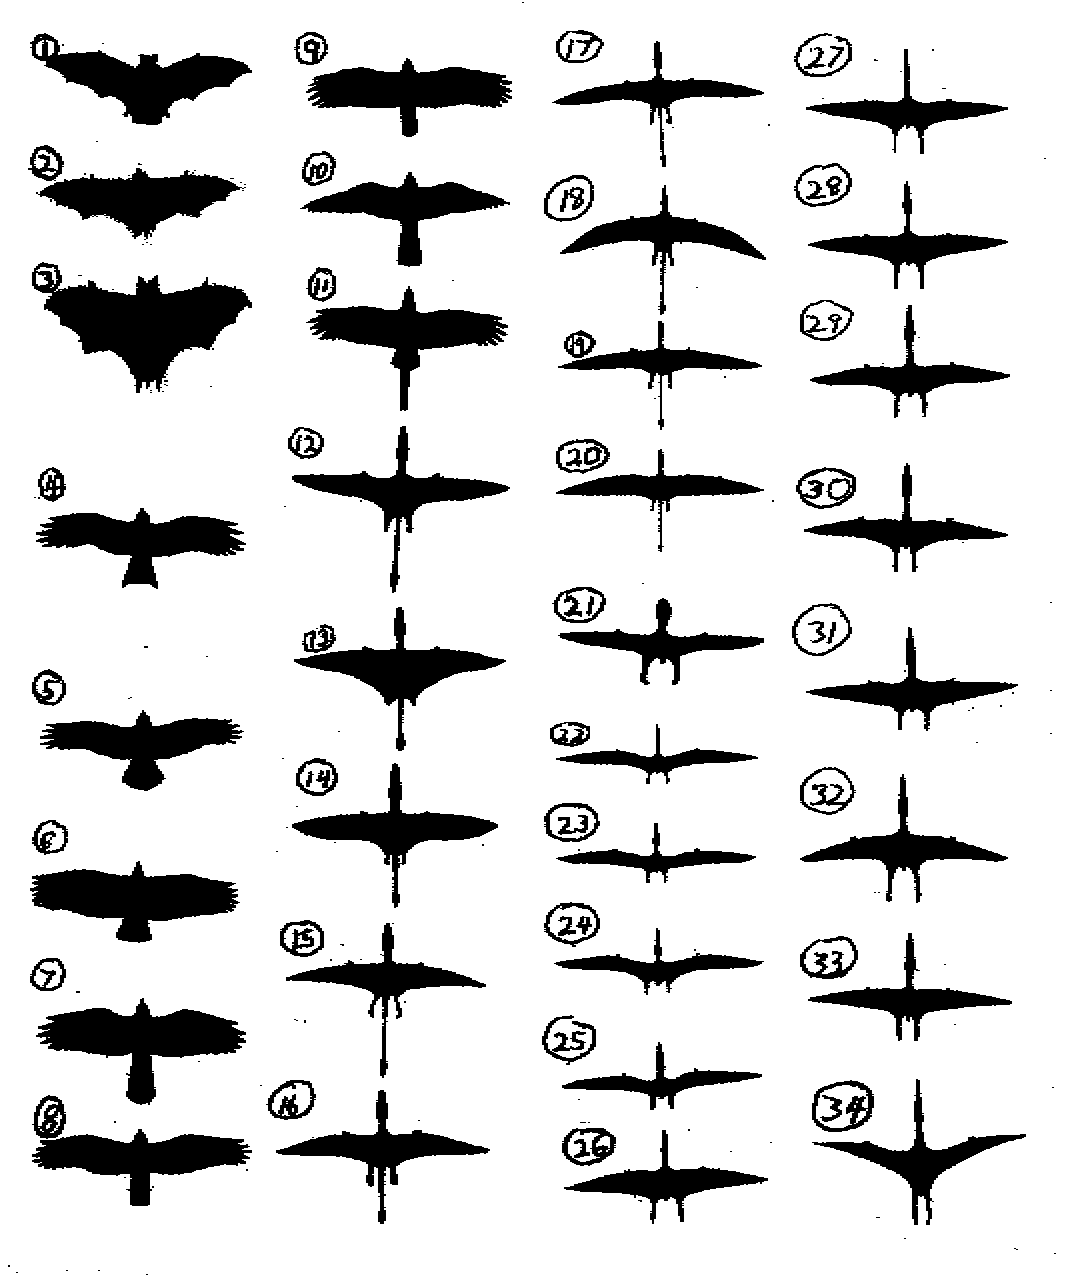 silhouette page of 34 images of bats, birds, and pterosaurs, used by Guessman and Woetzel on their 2004 expedition on Umboi Island